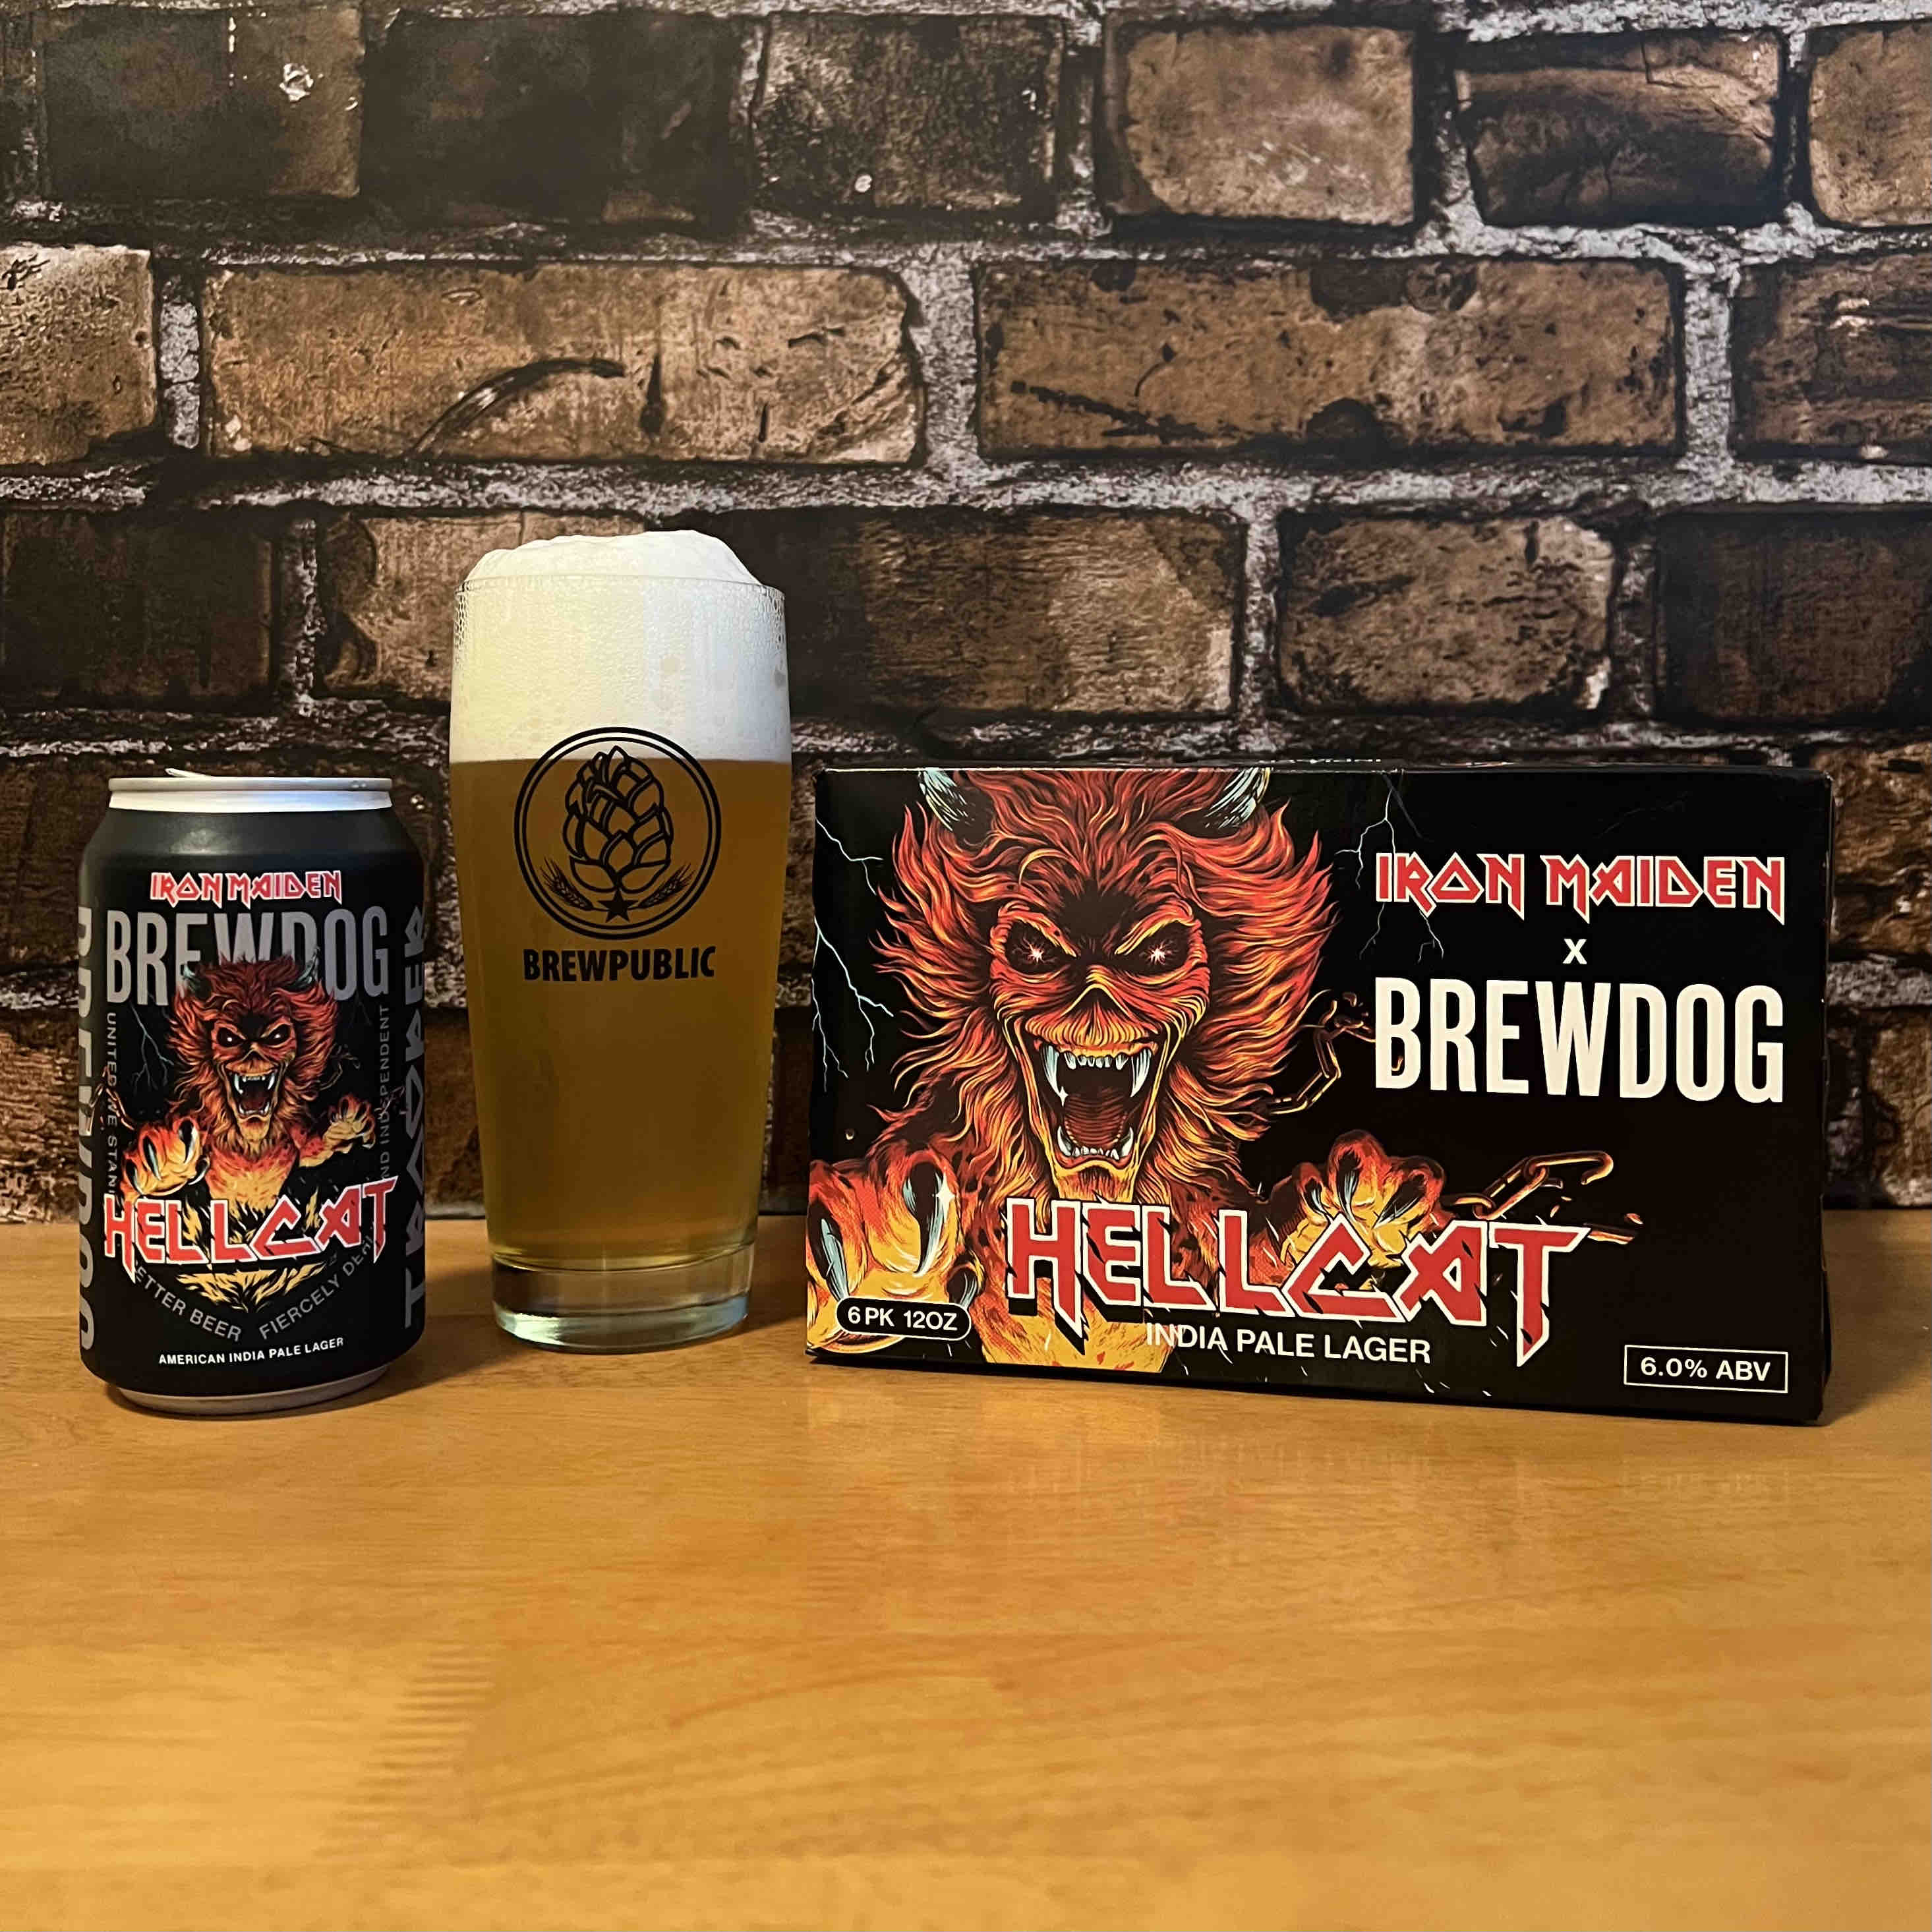 BrewDog teams up with Iron Maiden on Hellcat India Pale Lager